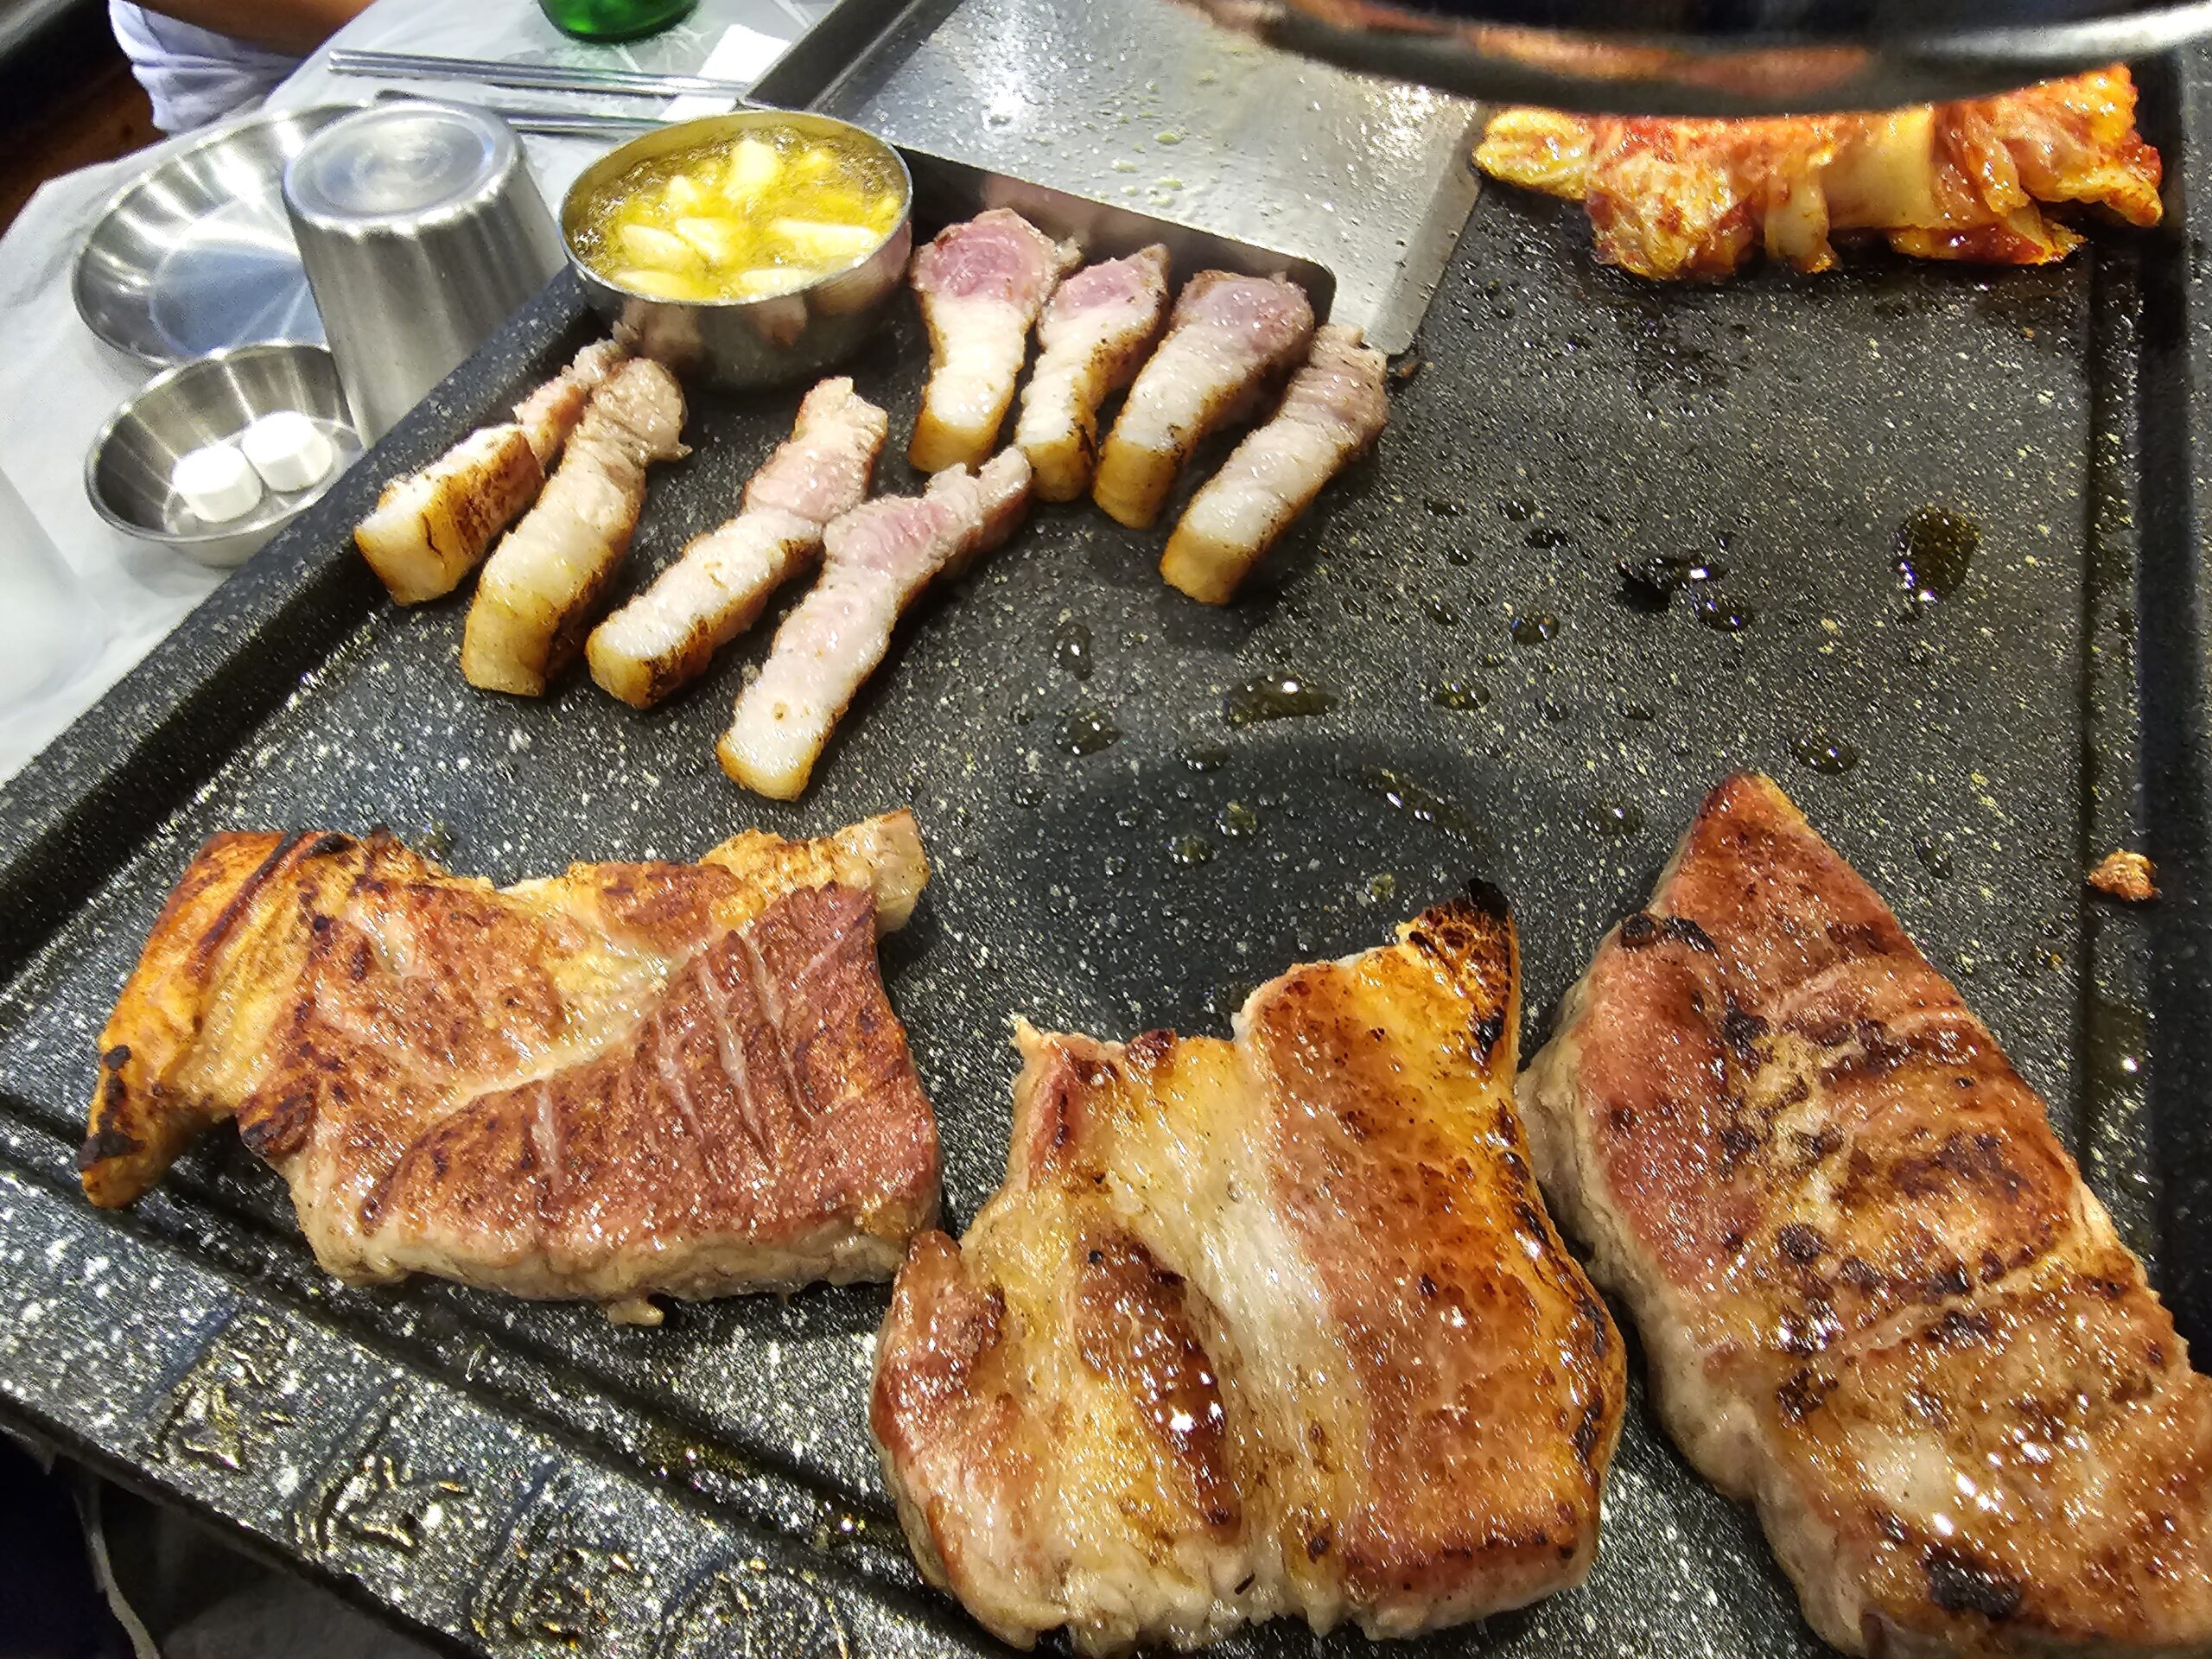 A Must-Try Restaurant for Korean Pork belly samgyeopsal Lovers in Incheon